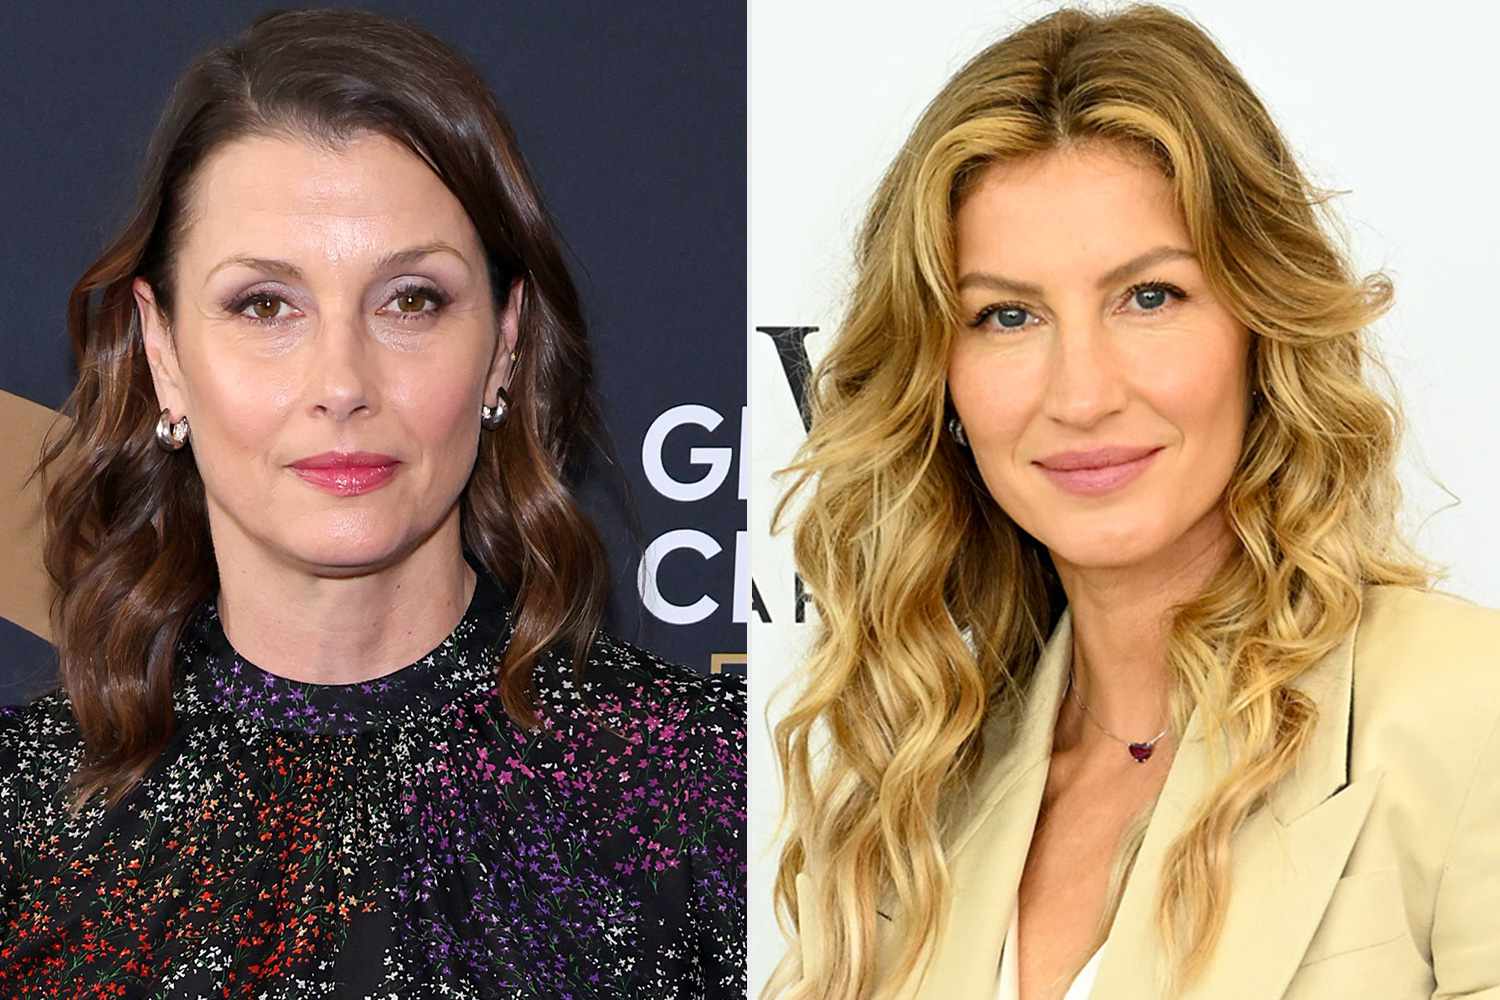 Bridget Moynahan Calls Attention to Crisis in Brazil That Gisele Bündchen Is Raising Relief Money For